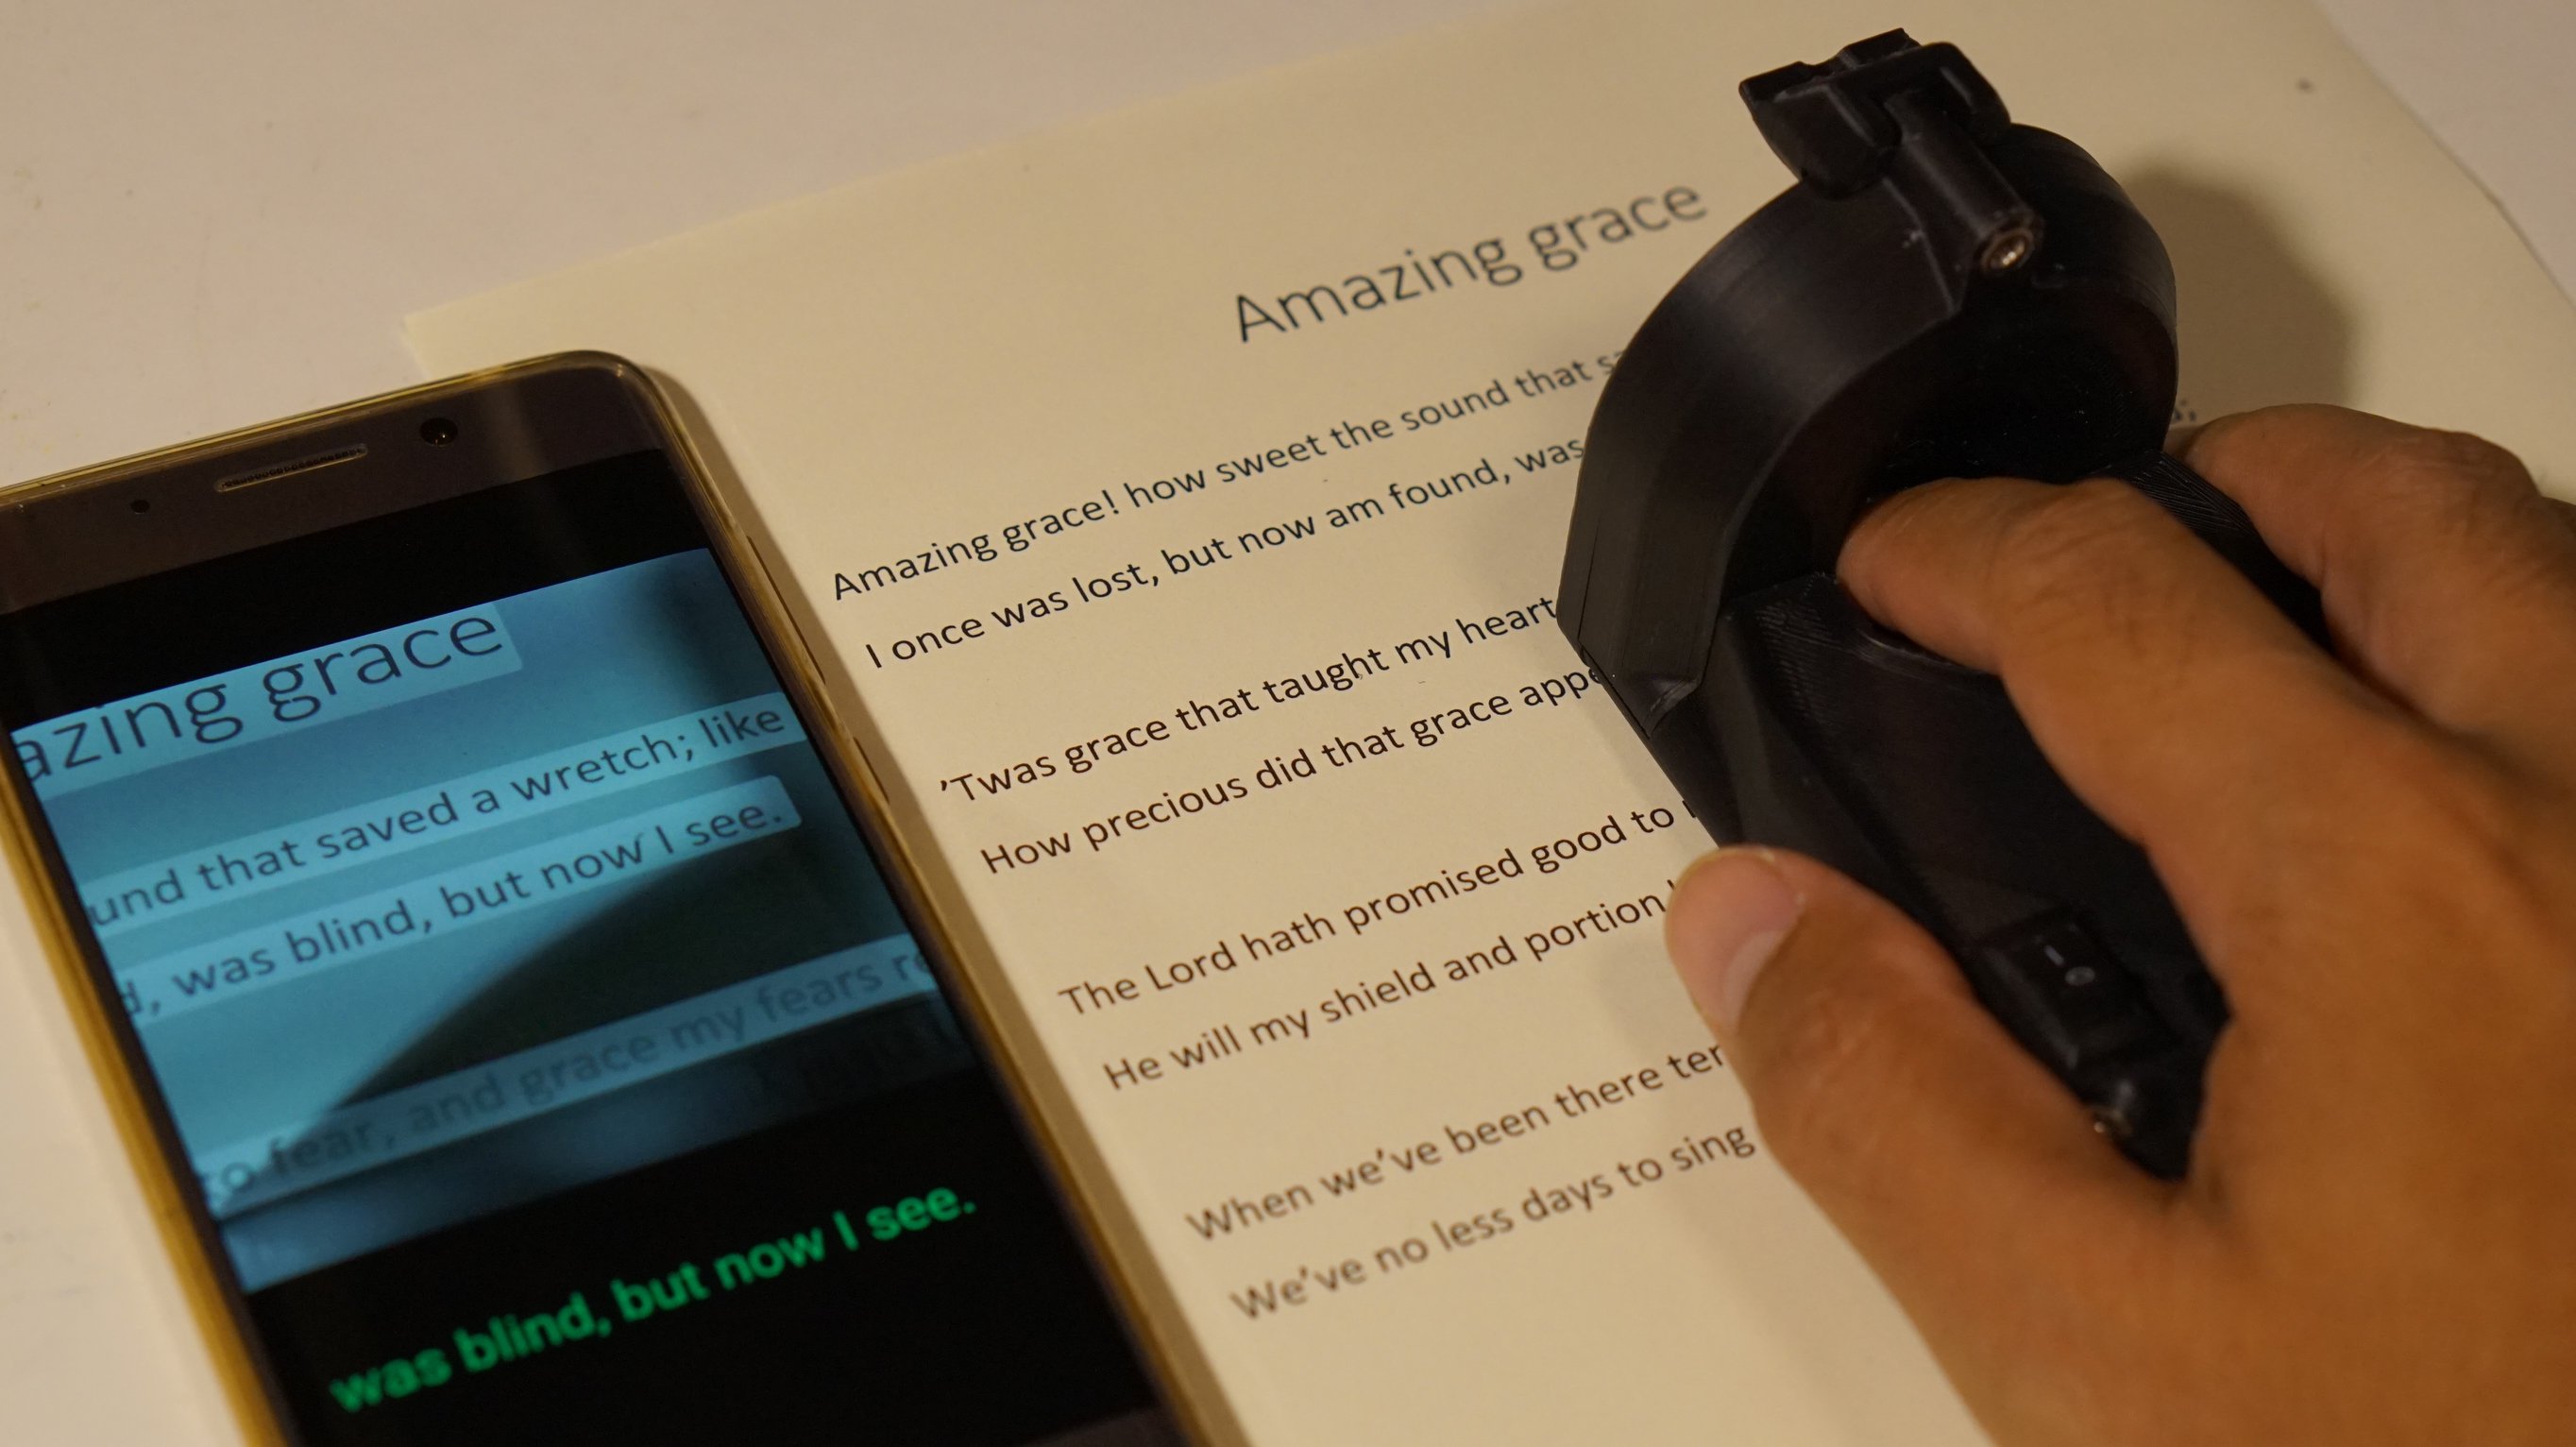 The ReadRing in action.  Its scanning the text of Amazing Grace on paper that's showing up on a smartphone that's triggering the rotary braille display in the ReadRing.